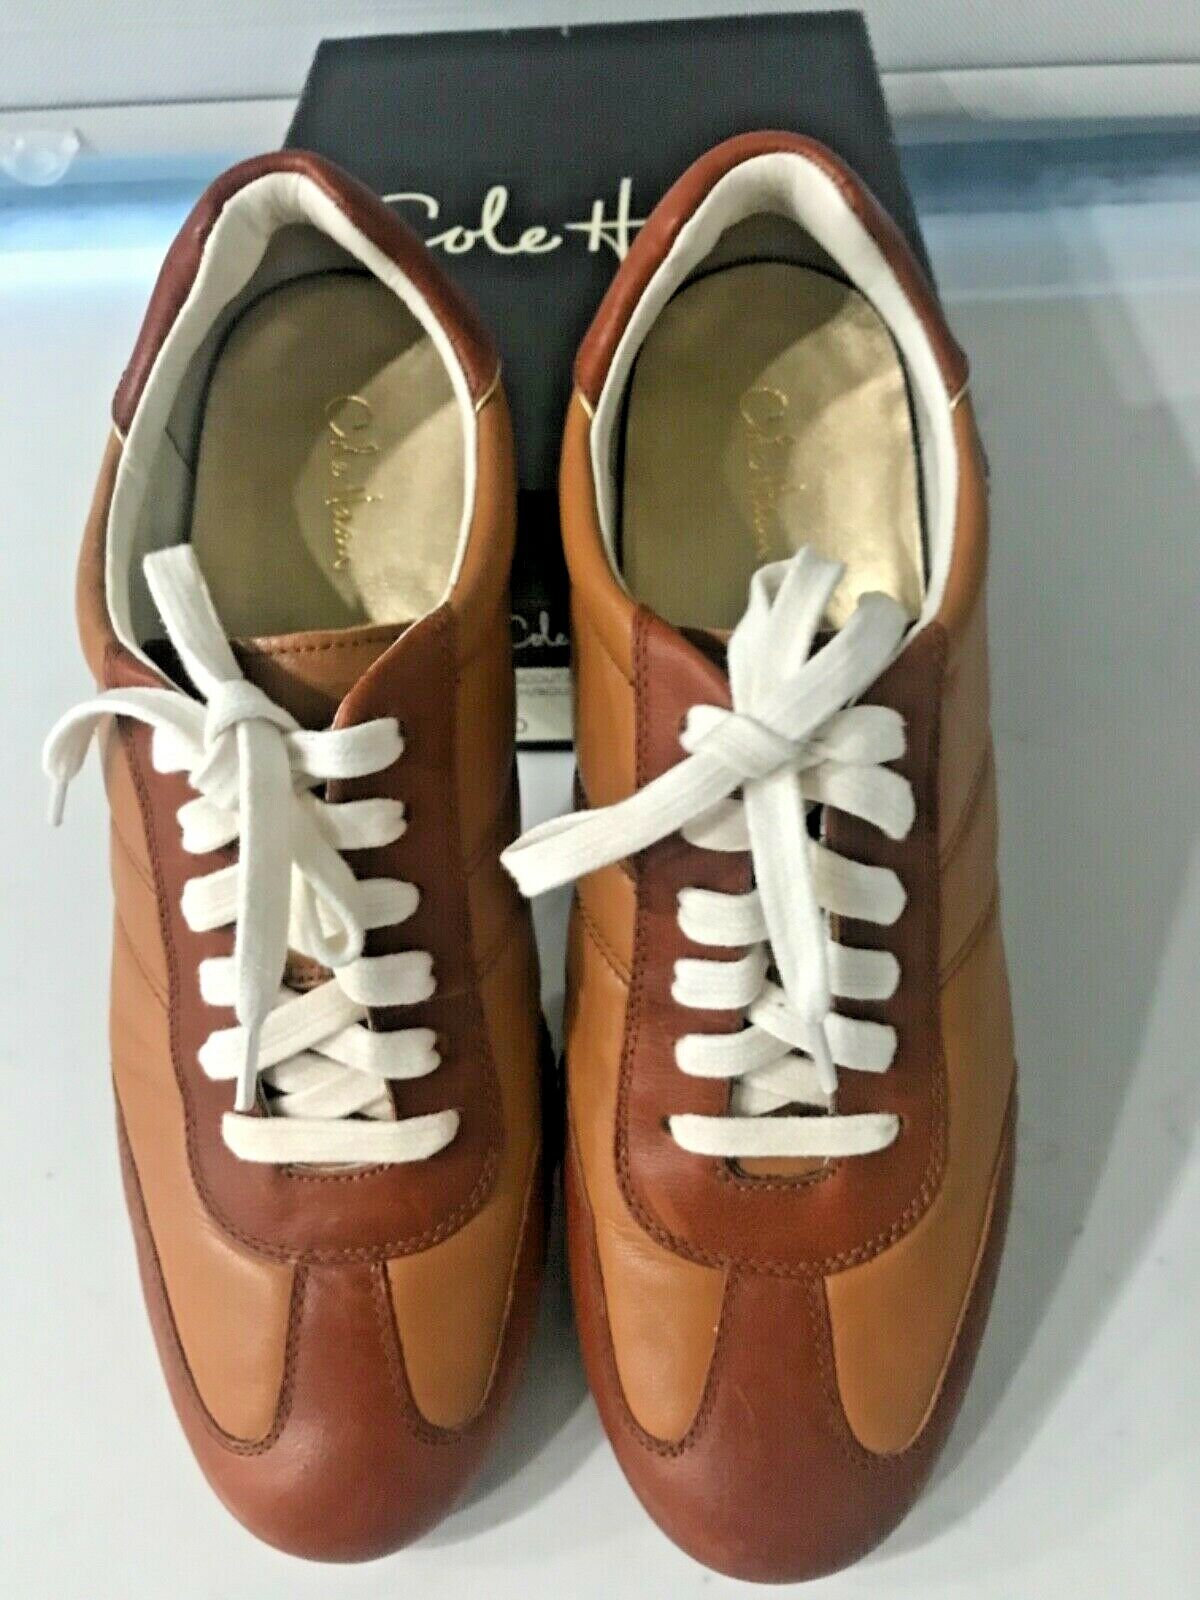 New! Cole Haan “Air Scout Lace Up ll”